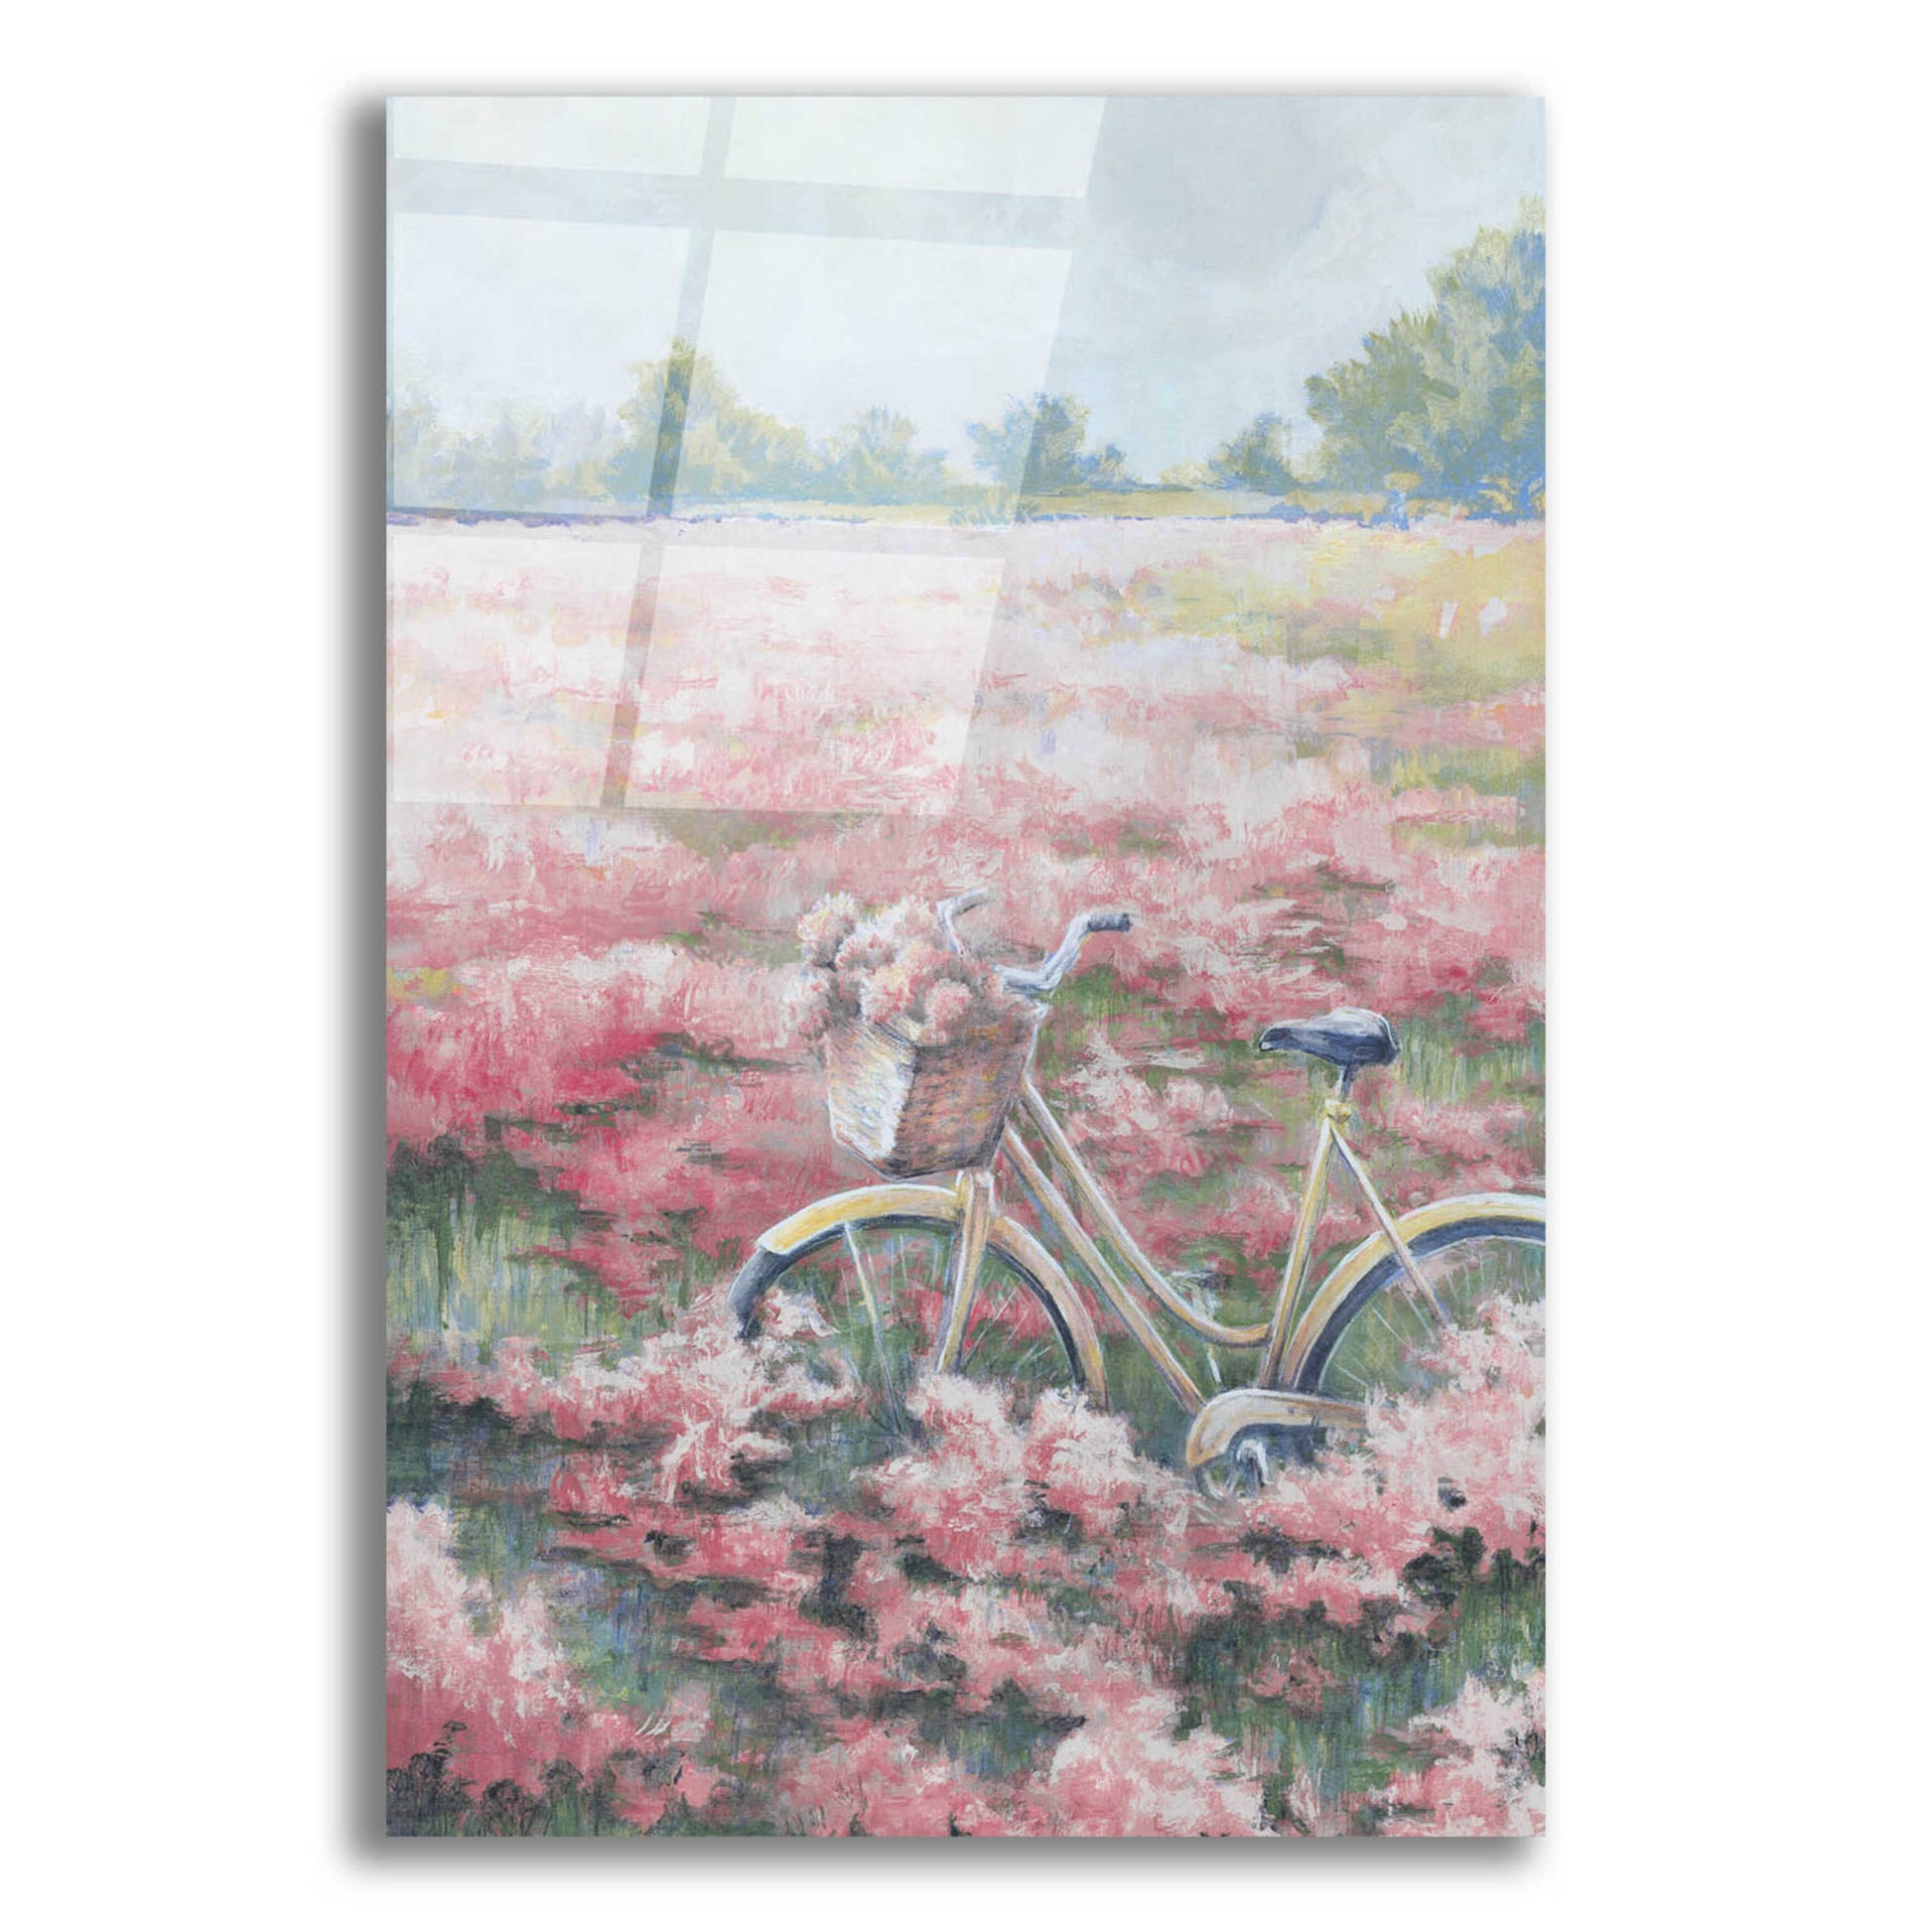 Epic Art 'Field Of Flowers' by White Ladder, Acrylic Glass Wall Art,12x16